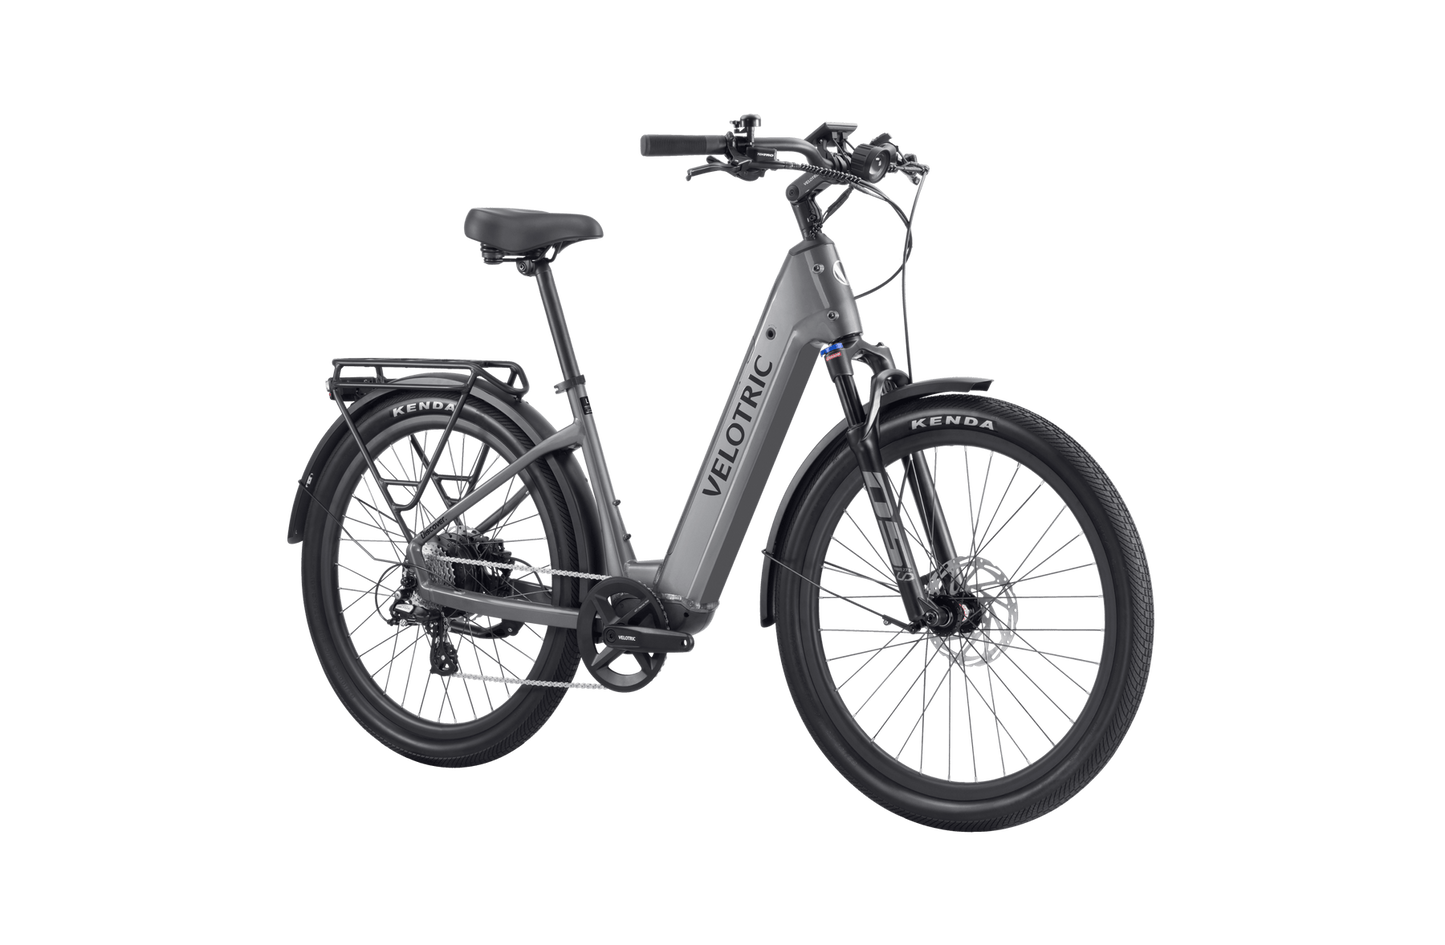 Tampa Bay eBikes presents the Velotric Discover 2 electric bicycle with a step-through frame and mounted battery displayed on a black background.